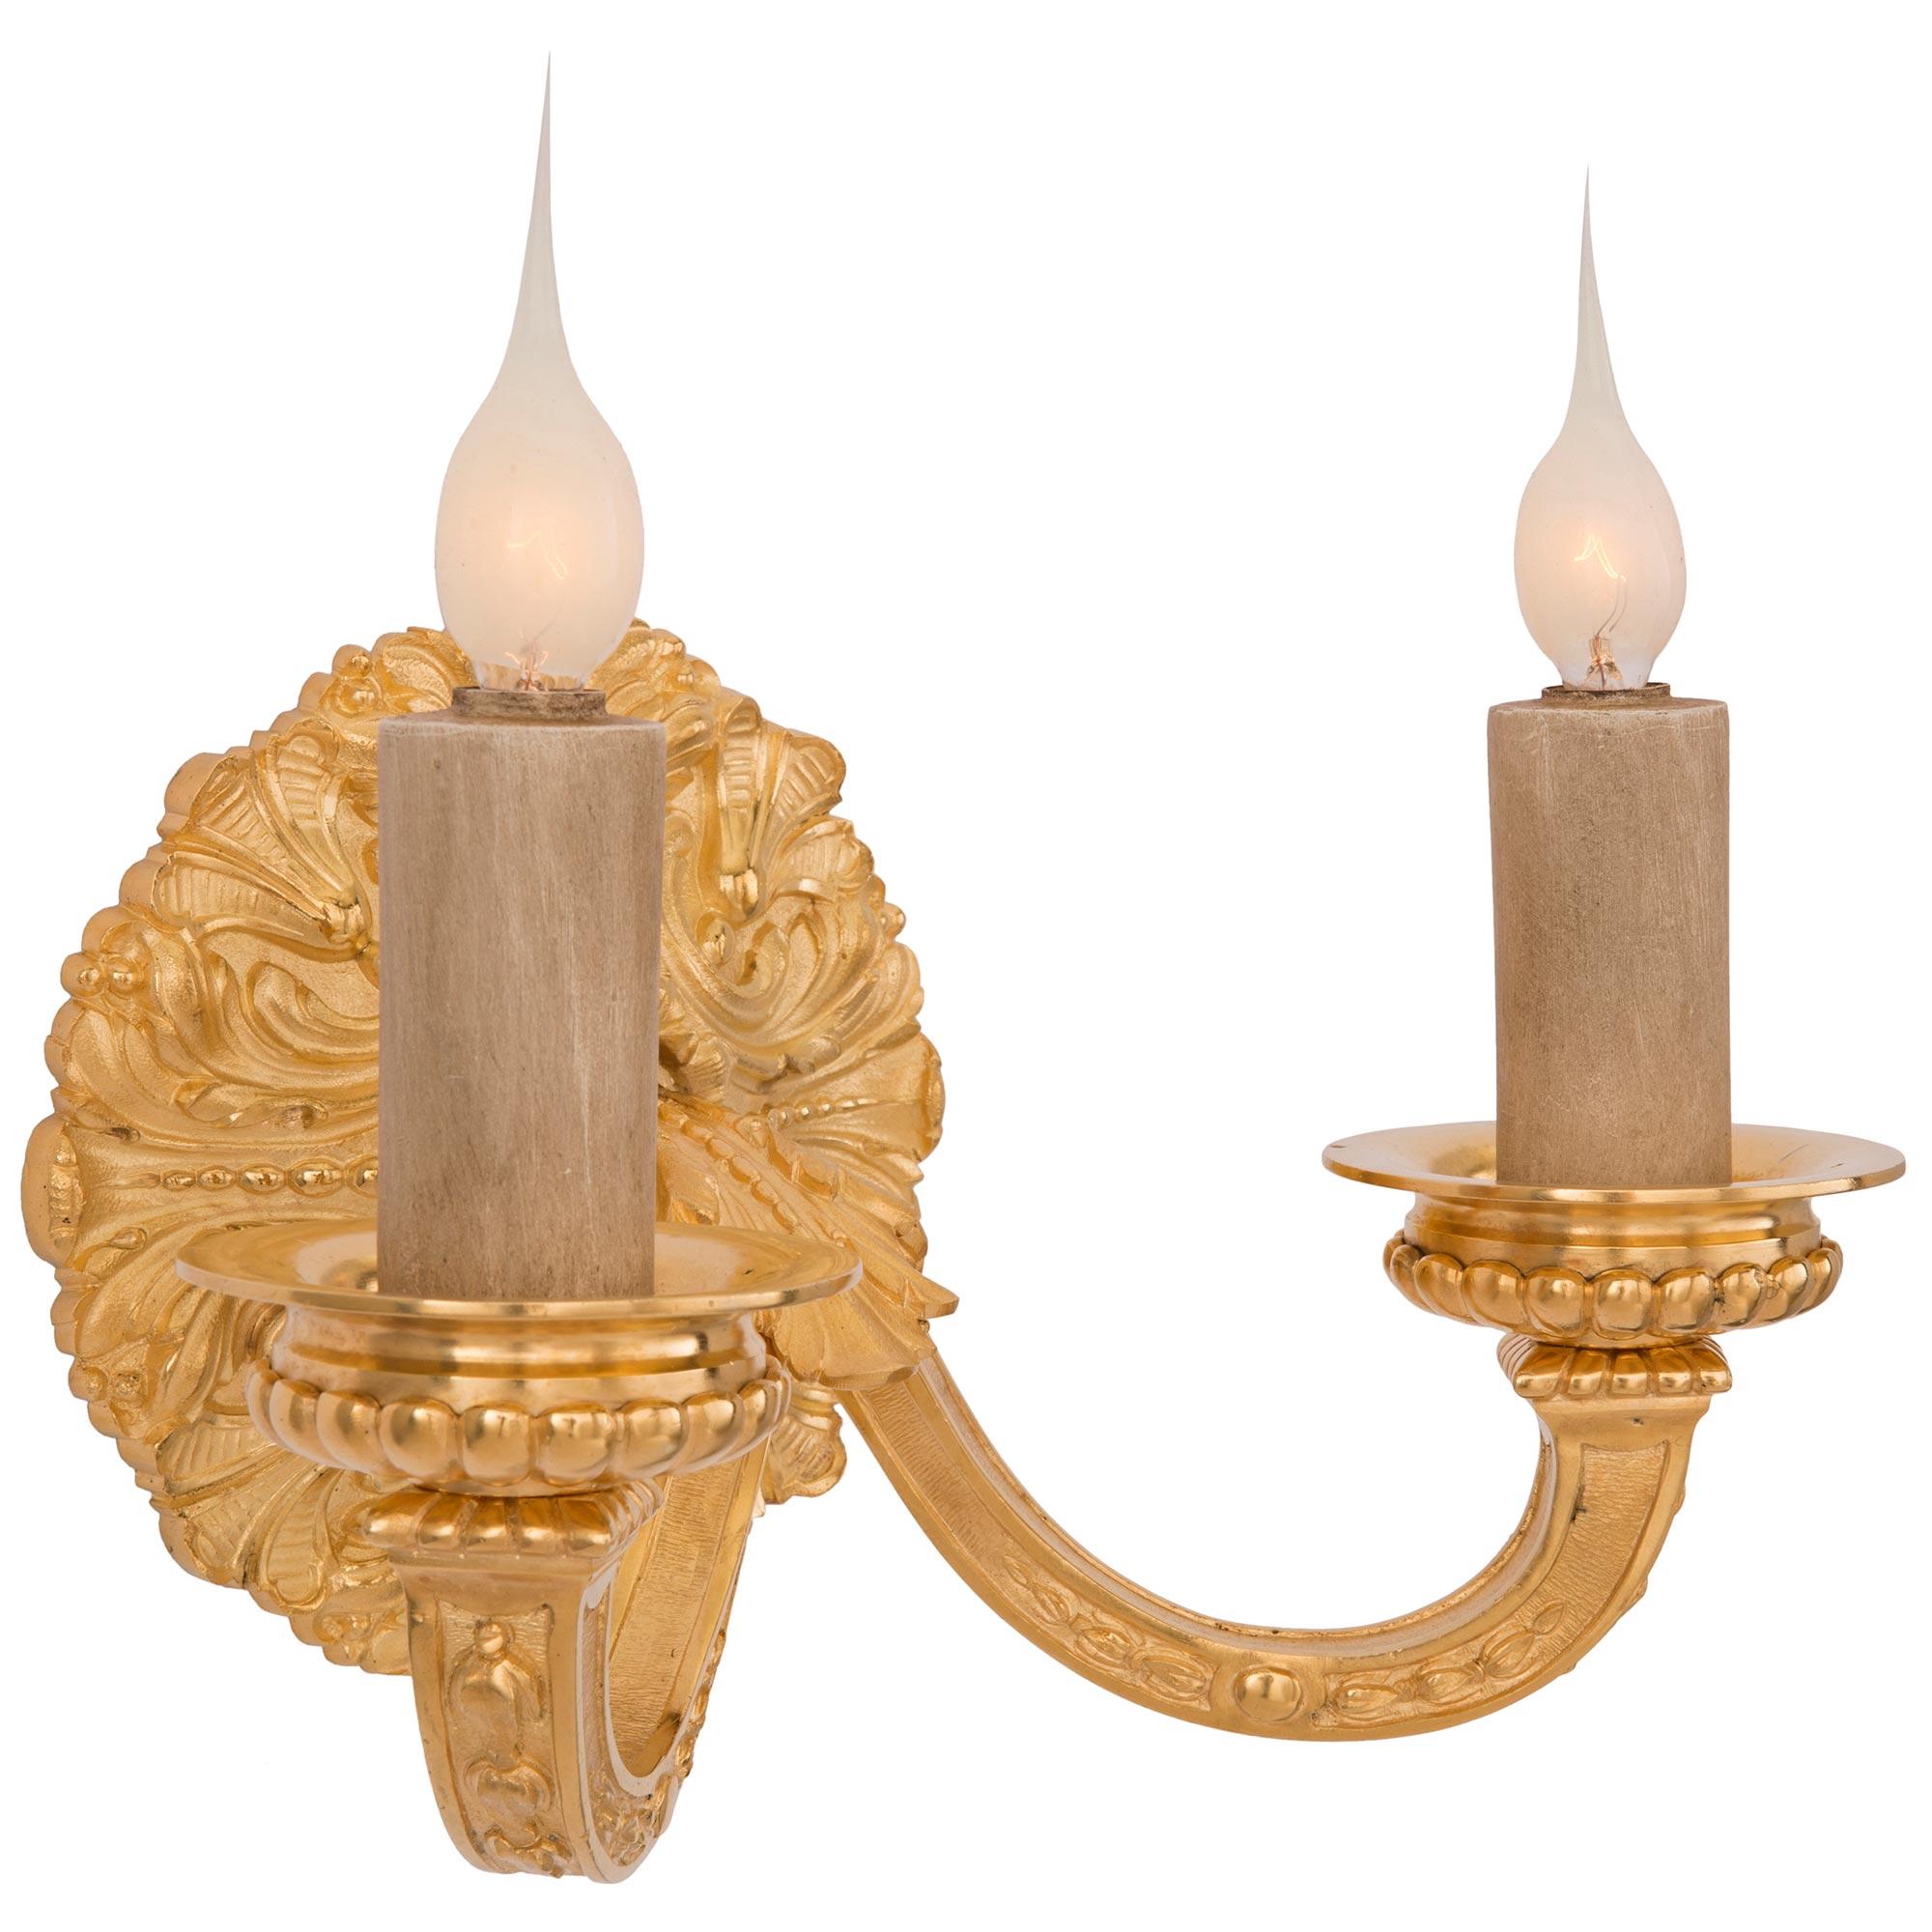 A lovely and most elegant pair of French 19th century Louis XIV st. ormolu sconces, after a model by André-Charles Boulle. Each two arm sconce is centered by a beautiful circular backplate with a finely detailed acanthus leaf design. The two